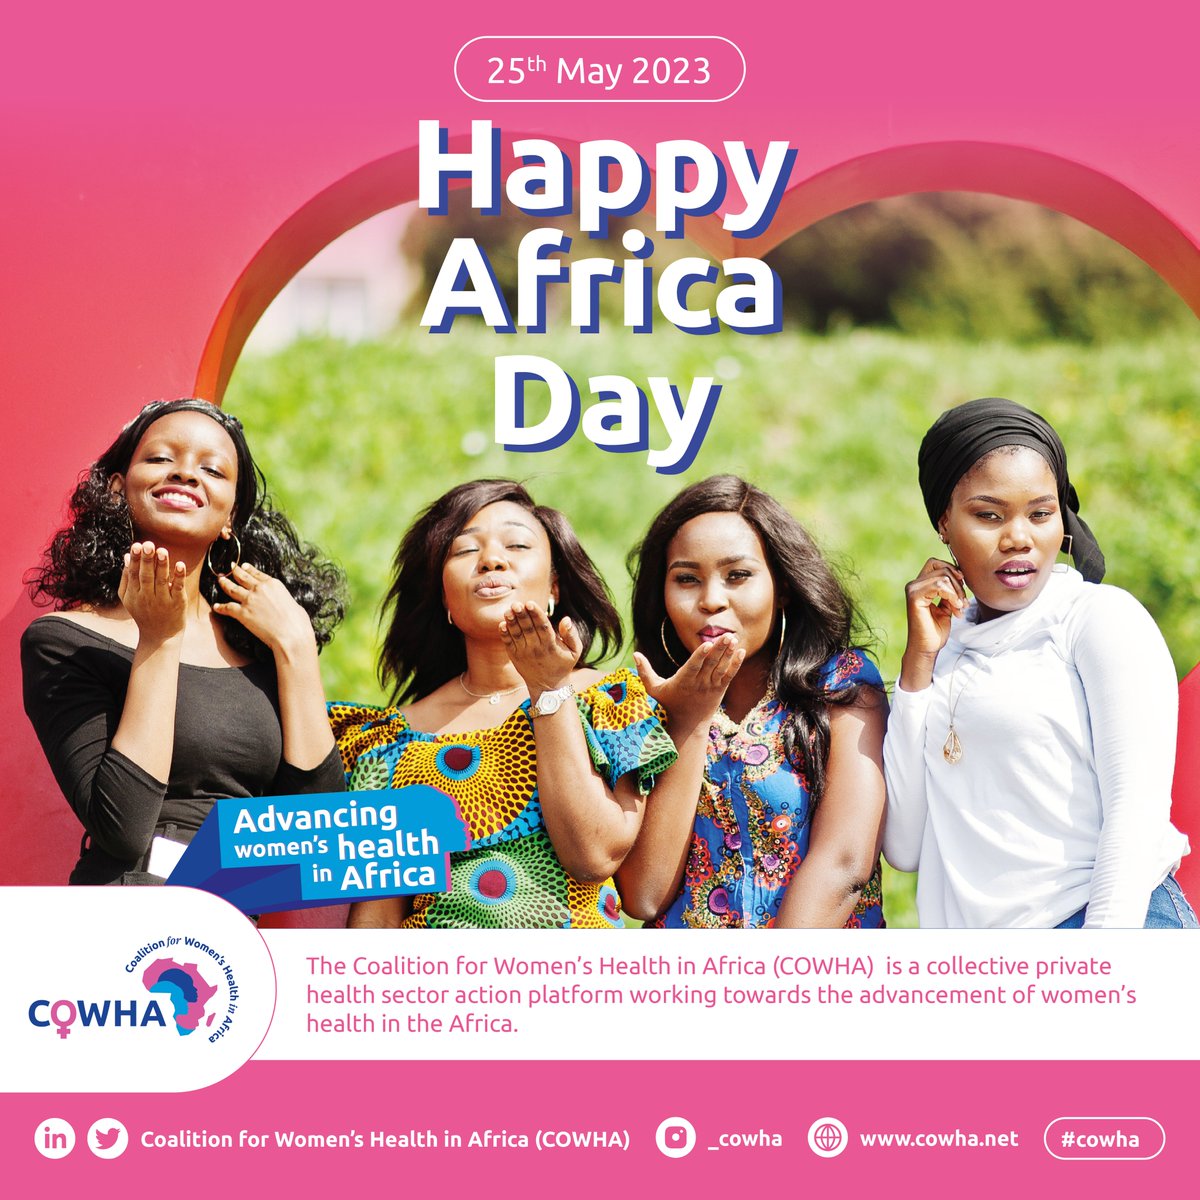 🌍 Happy Africa Day! 🌍
Let's take a moment to celebrate this amazing continent with its diverse cultures, rich history, and remarkable achievements.
#AfricaDay #Healthcare #Independence #Collaboration #womenshealth #healthcaresystem #StrongerAfrica